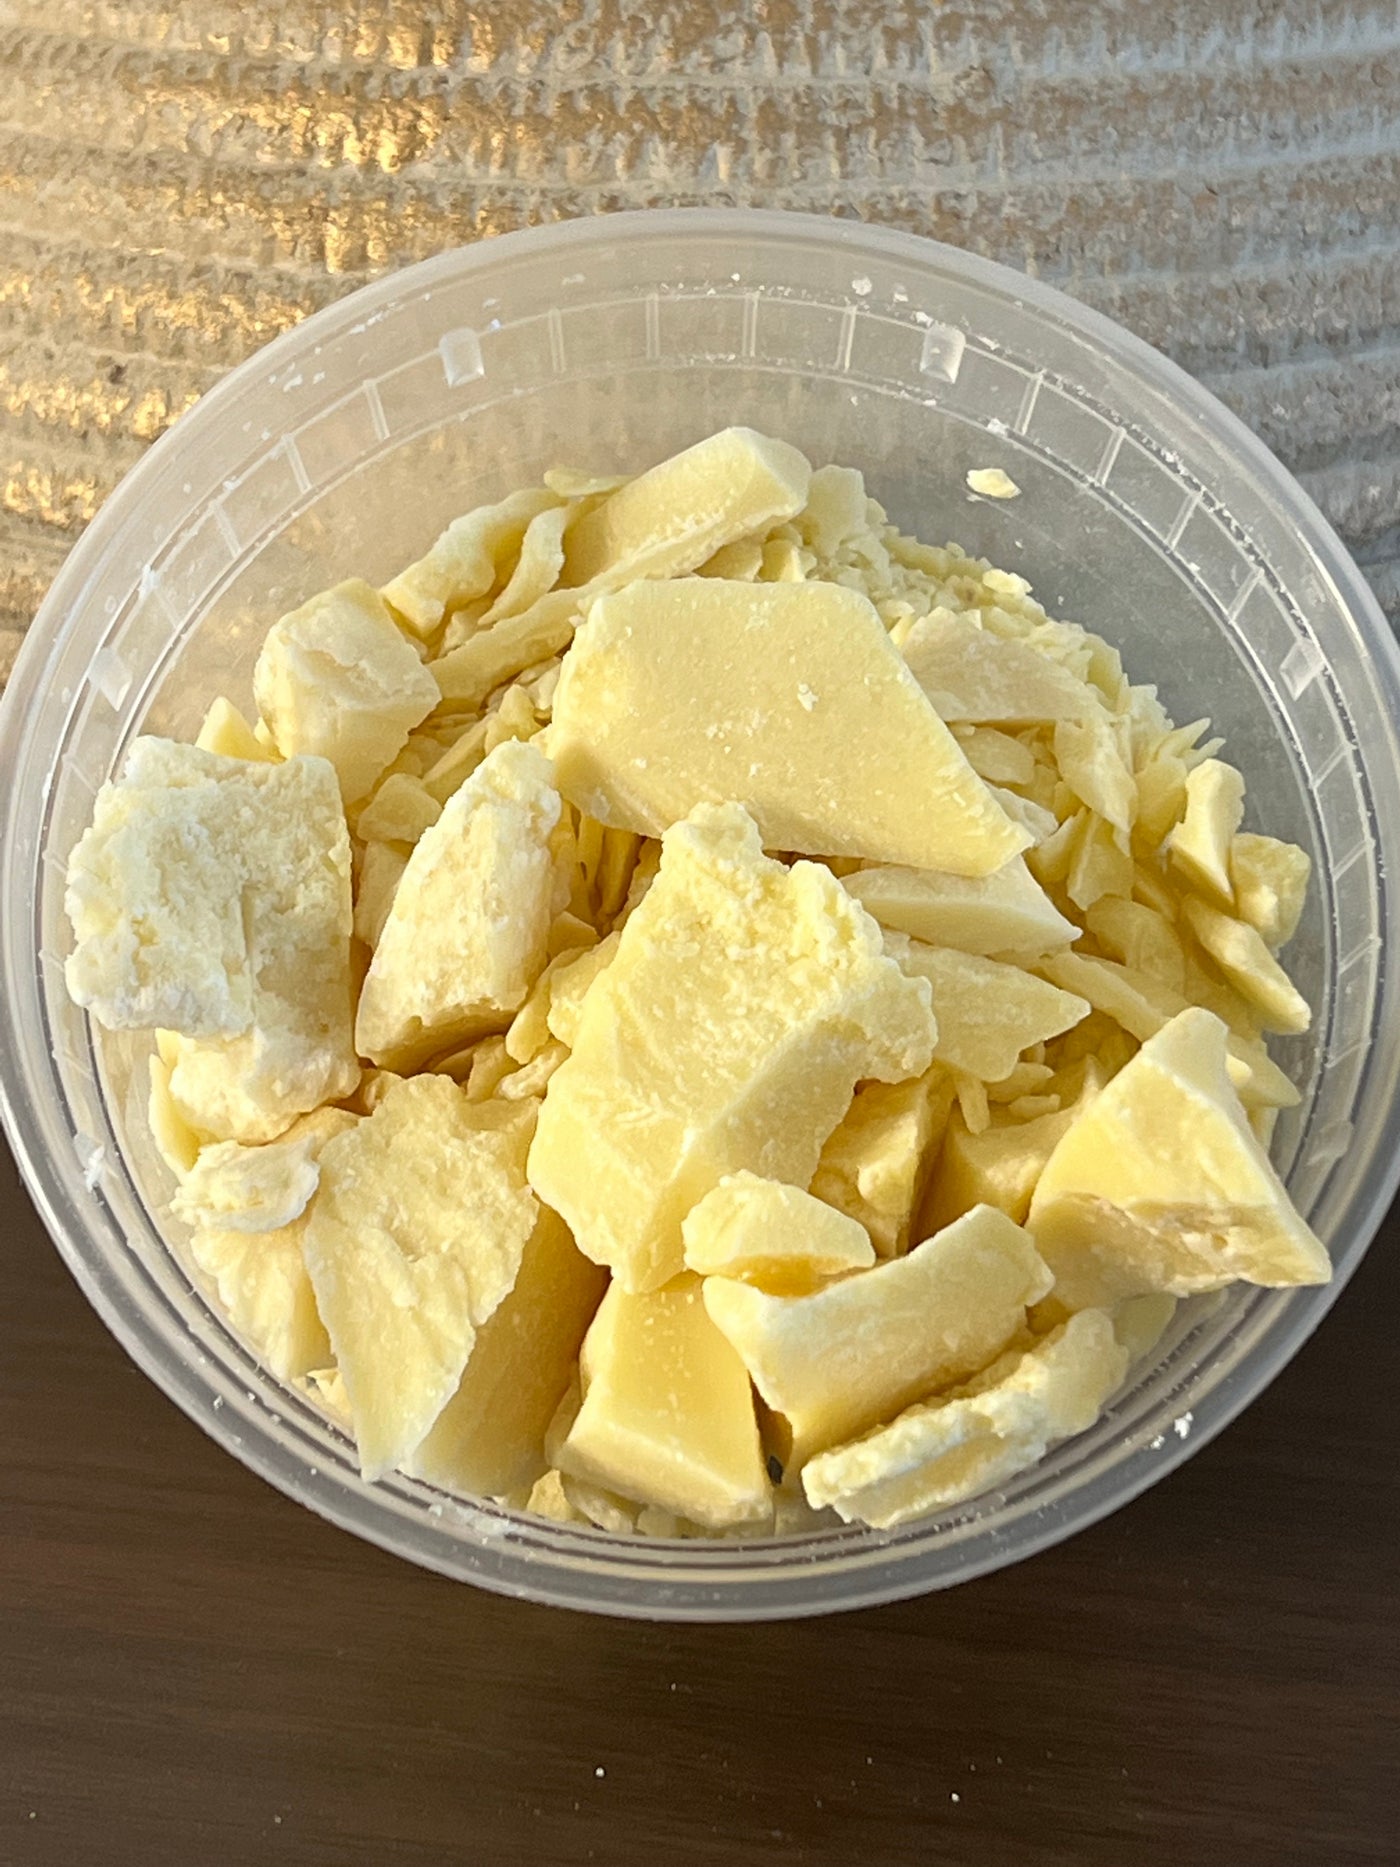 African Cocoa Butter 100% Natural